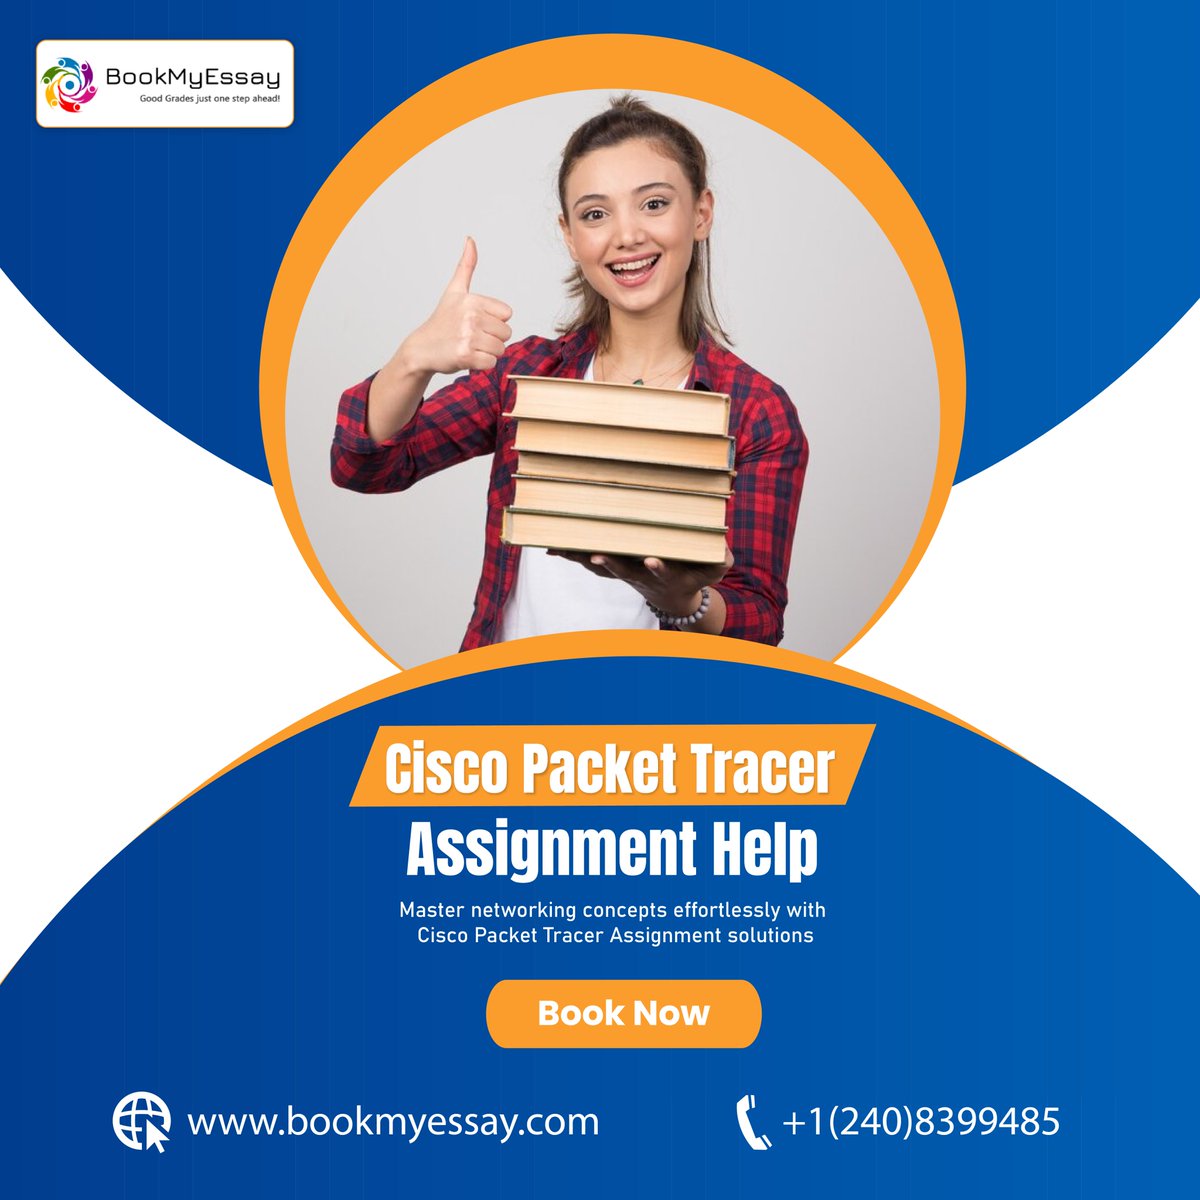 🌟 Exciting News for #networking  Enthusiasts! 🌟 Need help mastering #CiscoPacketTracerassignments? Look no further! 🚀 @Book_My_Essay is your go-to destination for top-notch Cisco Packet Tracer #AssignmentHelp. 

#CiscoPacketTracer  #educationinsights #homeworkguide #essay